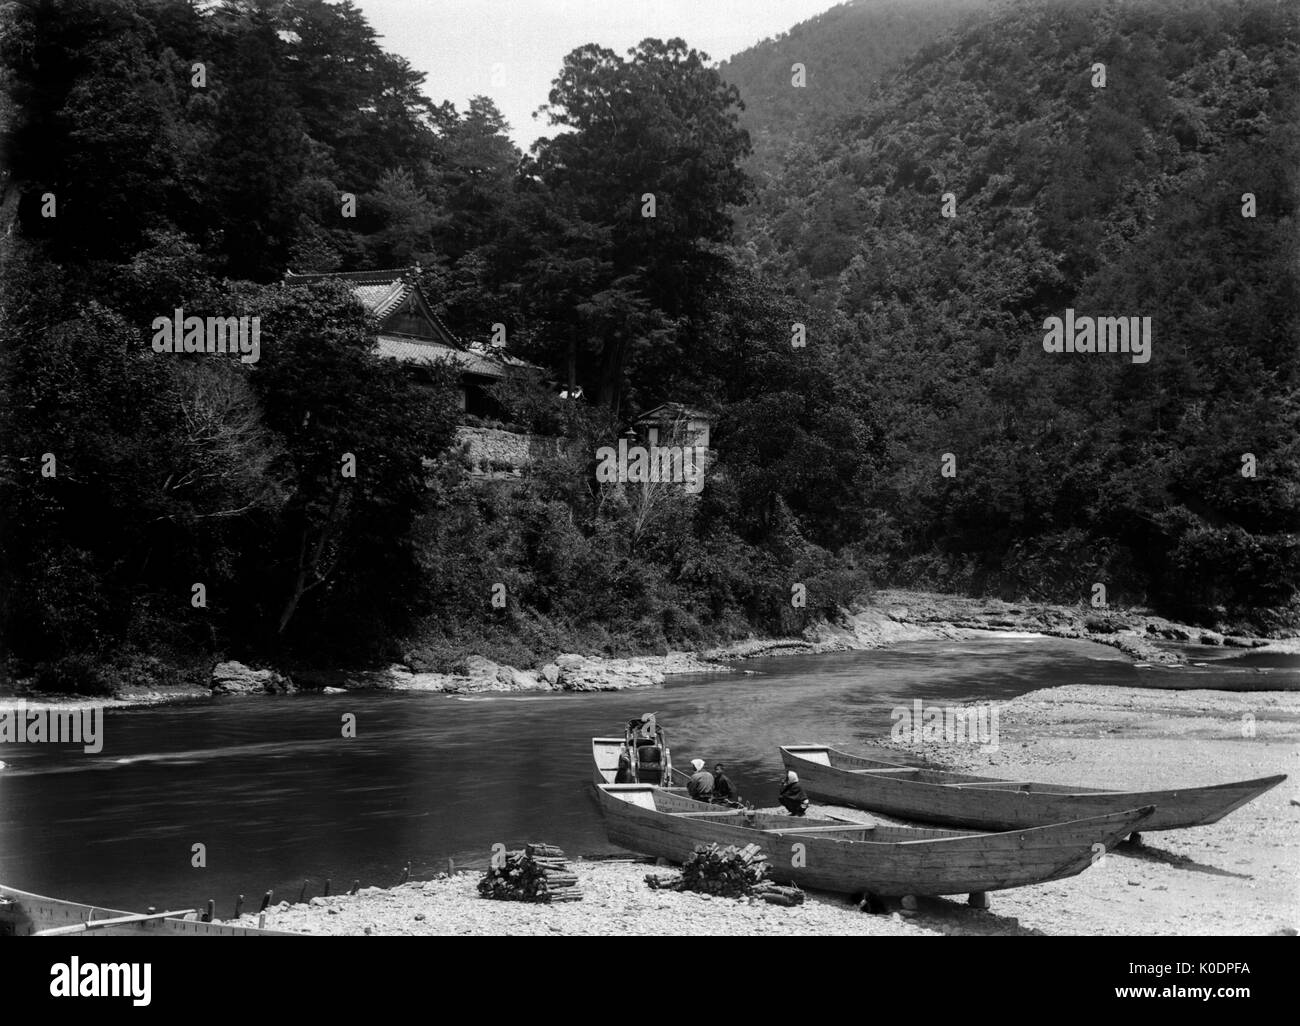 AJAXNETPHOTO. 1900 - 1910 APPROX. JAPAN. - LONGBOATS - A RIVER SCENE AND HILLY LANDSCAPE SCENE WITH WOODEN RIVER BOATS DRAWN UP ON THE RIVER BANK. PHOTOGRAPHER:UNKNOWN © DIGITAL IMAGE COPYRIGHT AJAX VINTAGE PICTURE LIBRARY SOURCE: AJAX VINTAGE PICTURE LIBRARY COLLECTION REF:171308_1013 Stock Photo